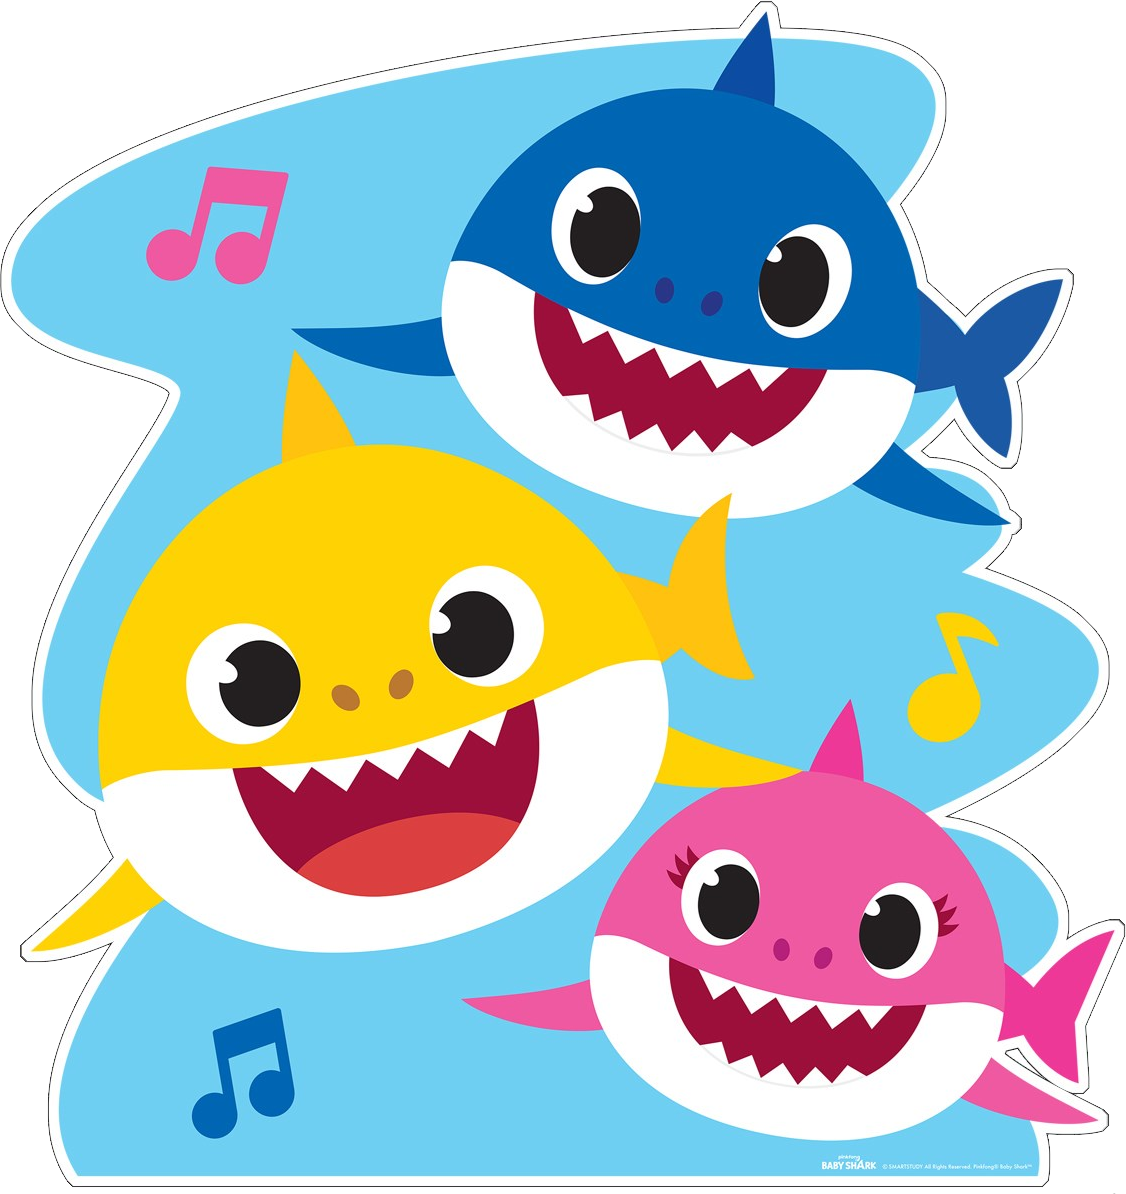 Baby Shark Music Fun Comics Picture Download PNG Transparent Background,  Free Download #49174 - FreeIconsPNG